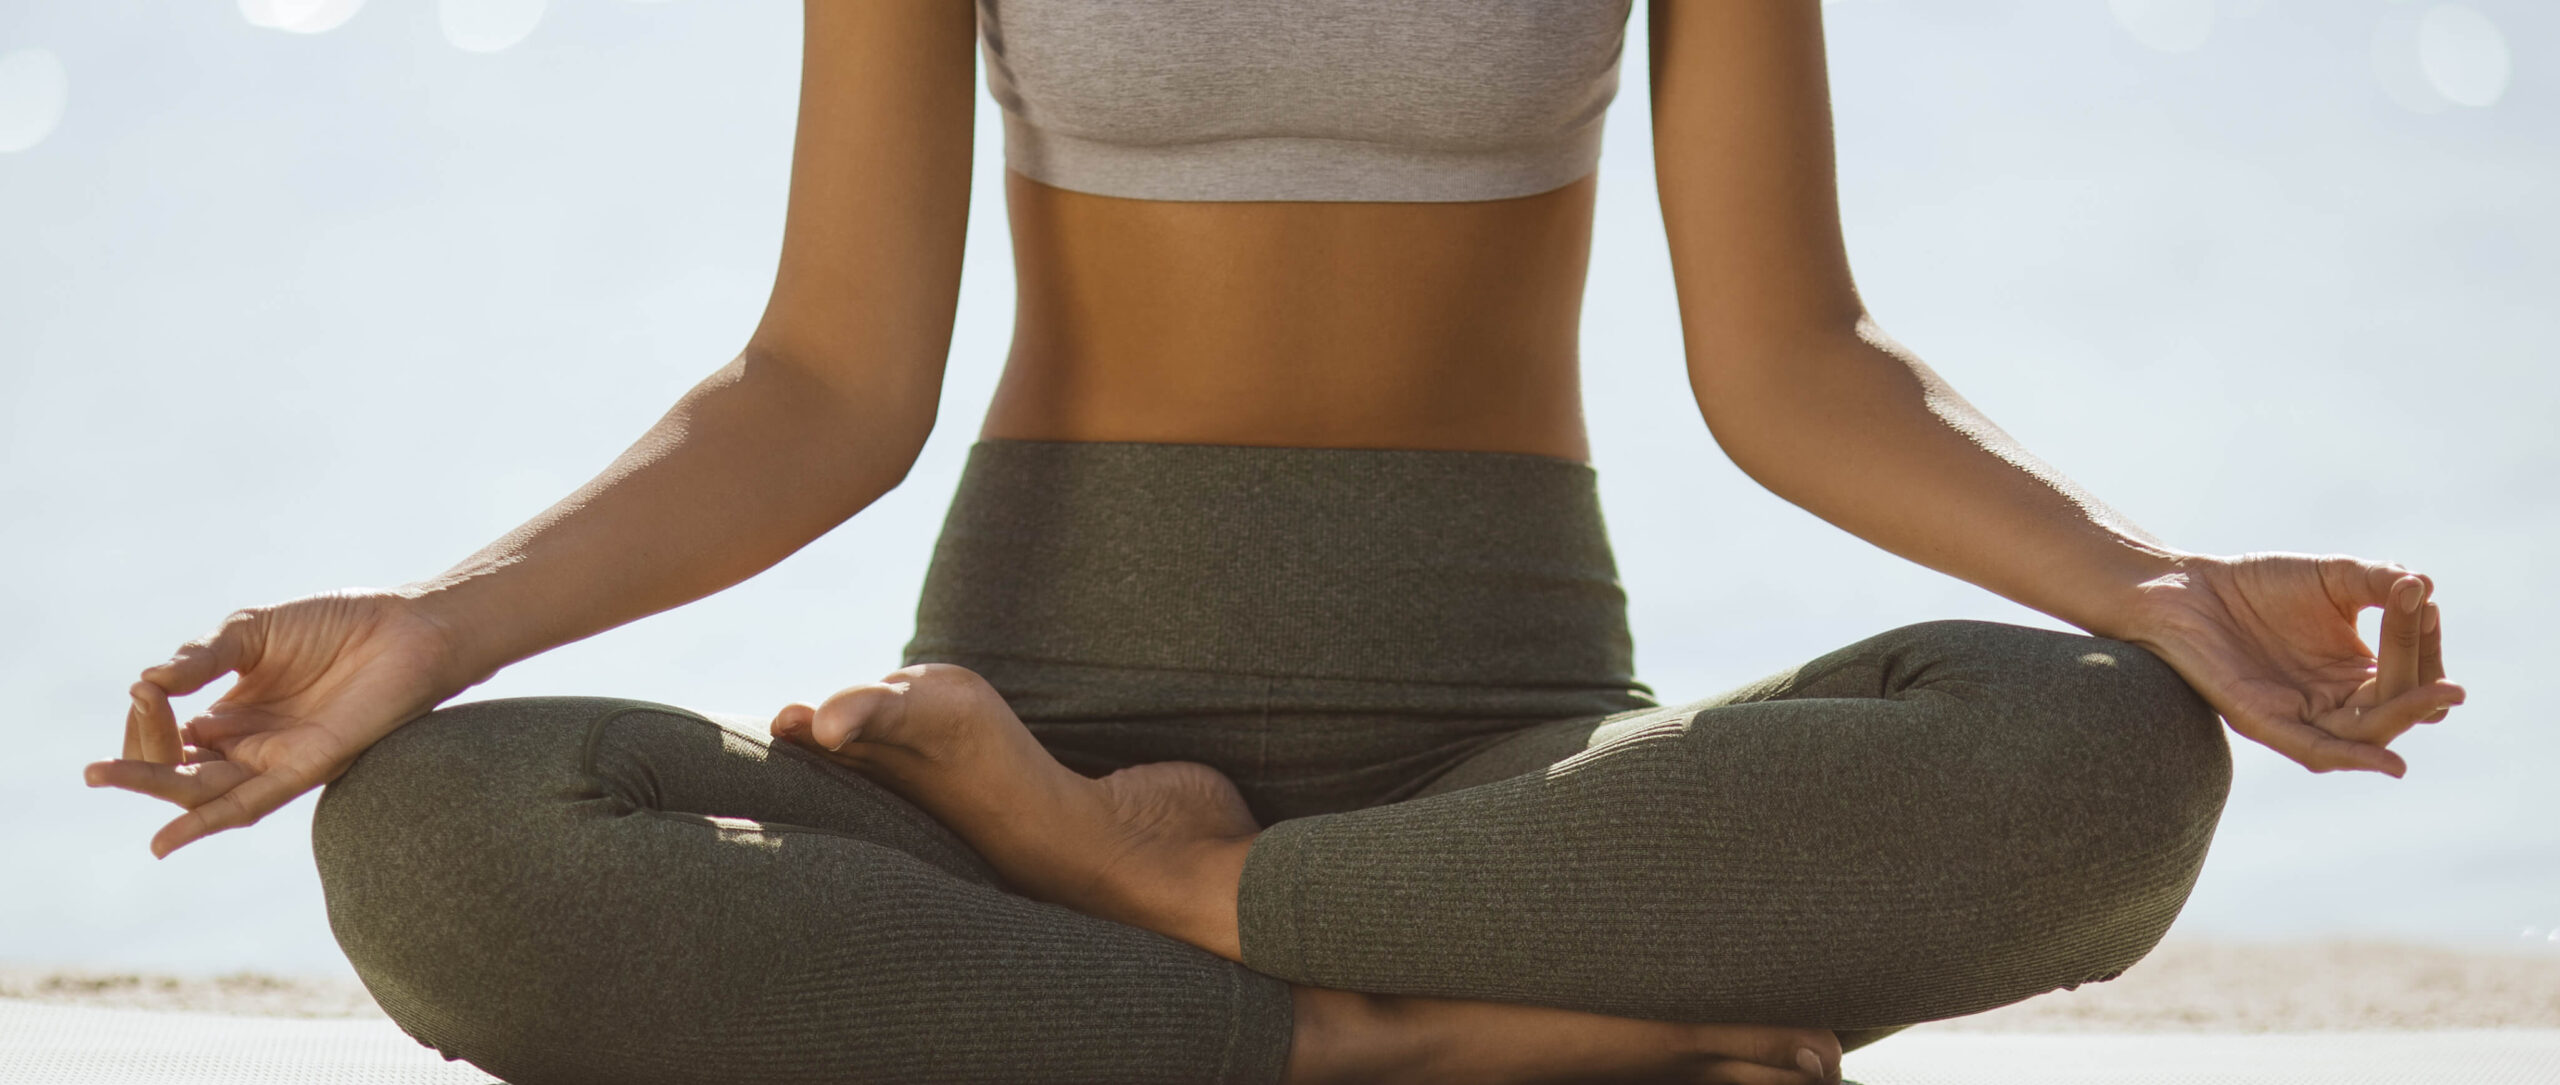 A picture of a woman sitting cross legged in a yoga pose, with her arms resting on her knees